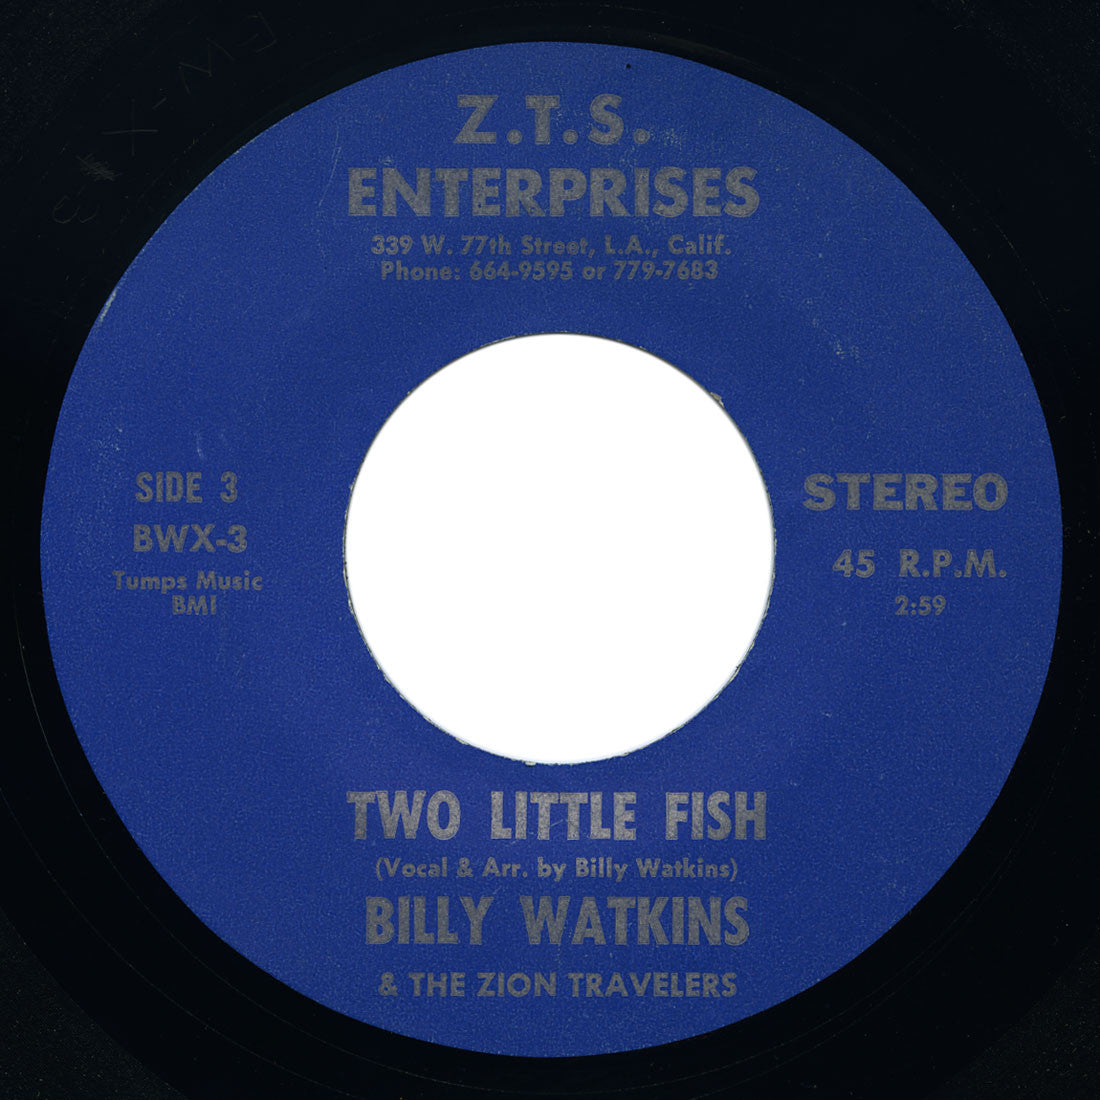 Billy Watkins & The Zion Travelers - Two Little Fish / Even Me - Z.T.S.